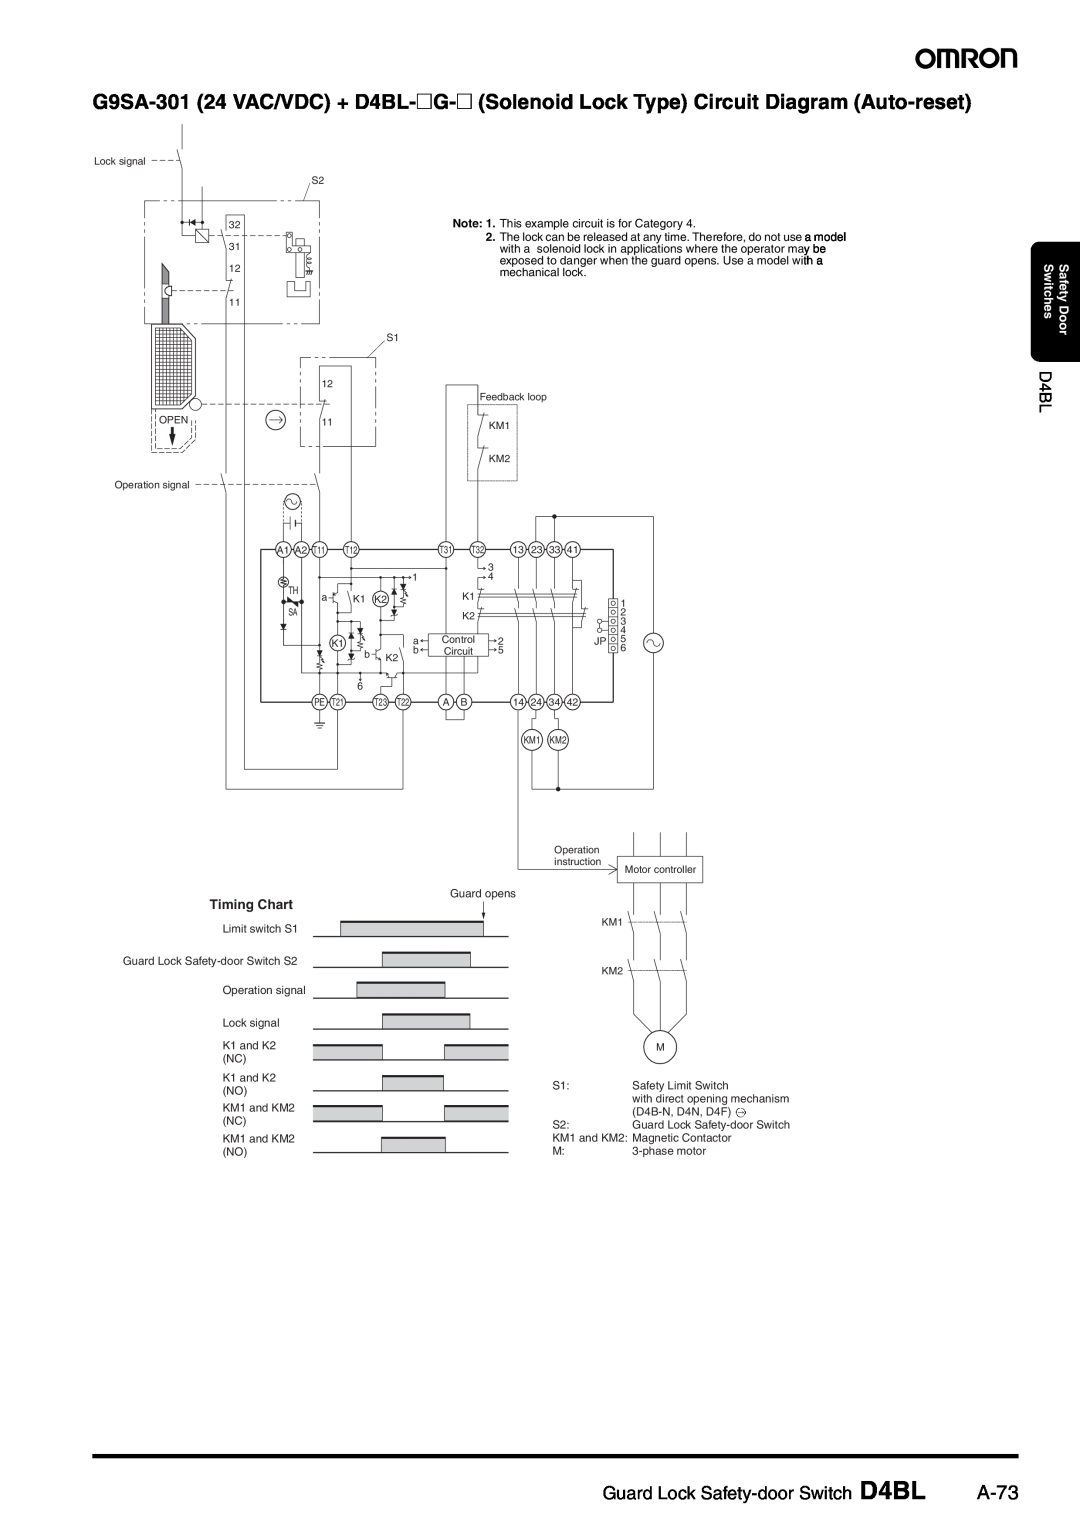 Omron manual A-73, Guard Lock Safety-door Switch D4BL, Timing Chart, Note 1. This example circuit is for Category 